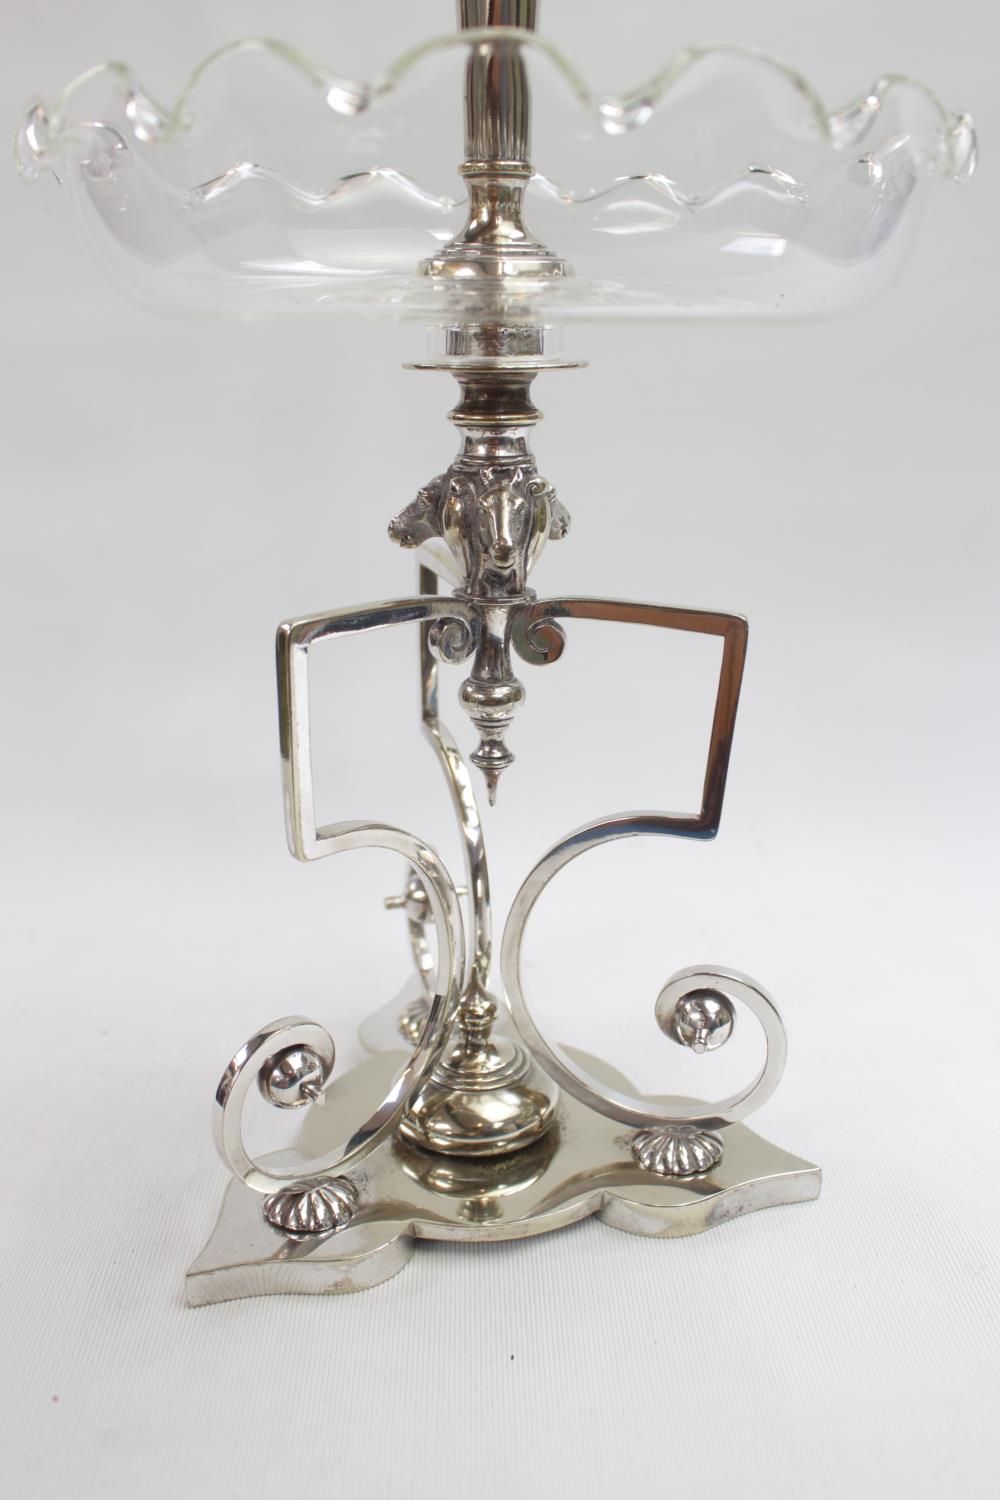 19thC Silver plated Equine decorated table centrepiece of singular glass flared posy over bowl and - Image 2 of 2